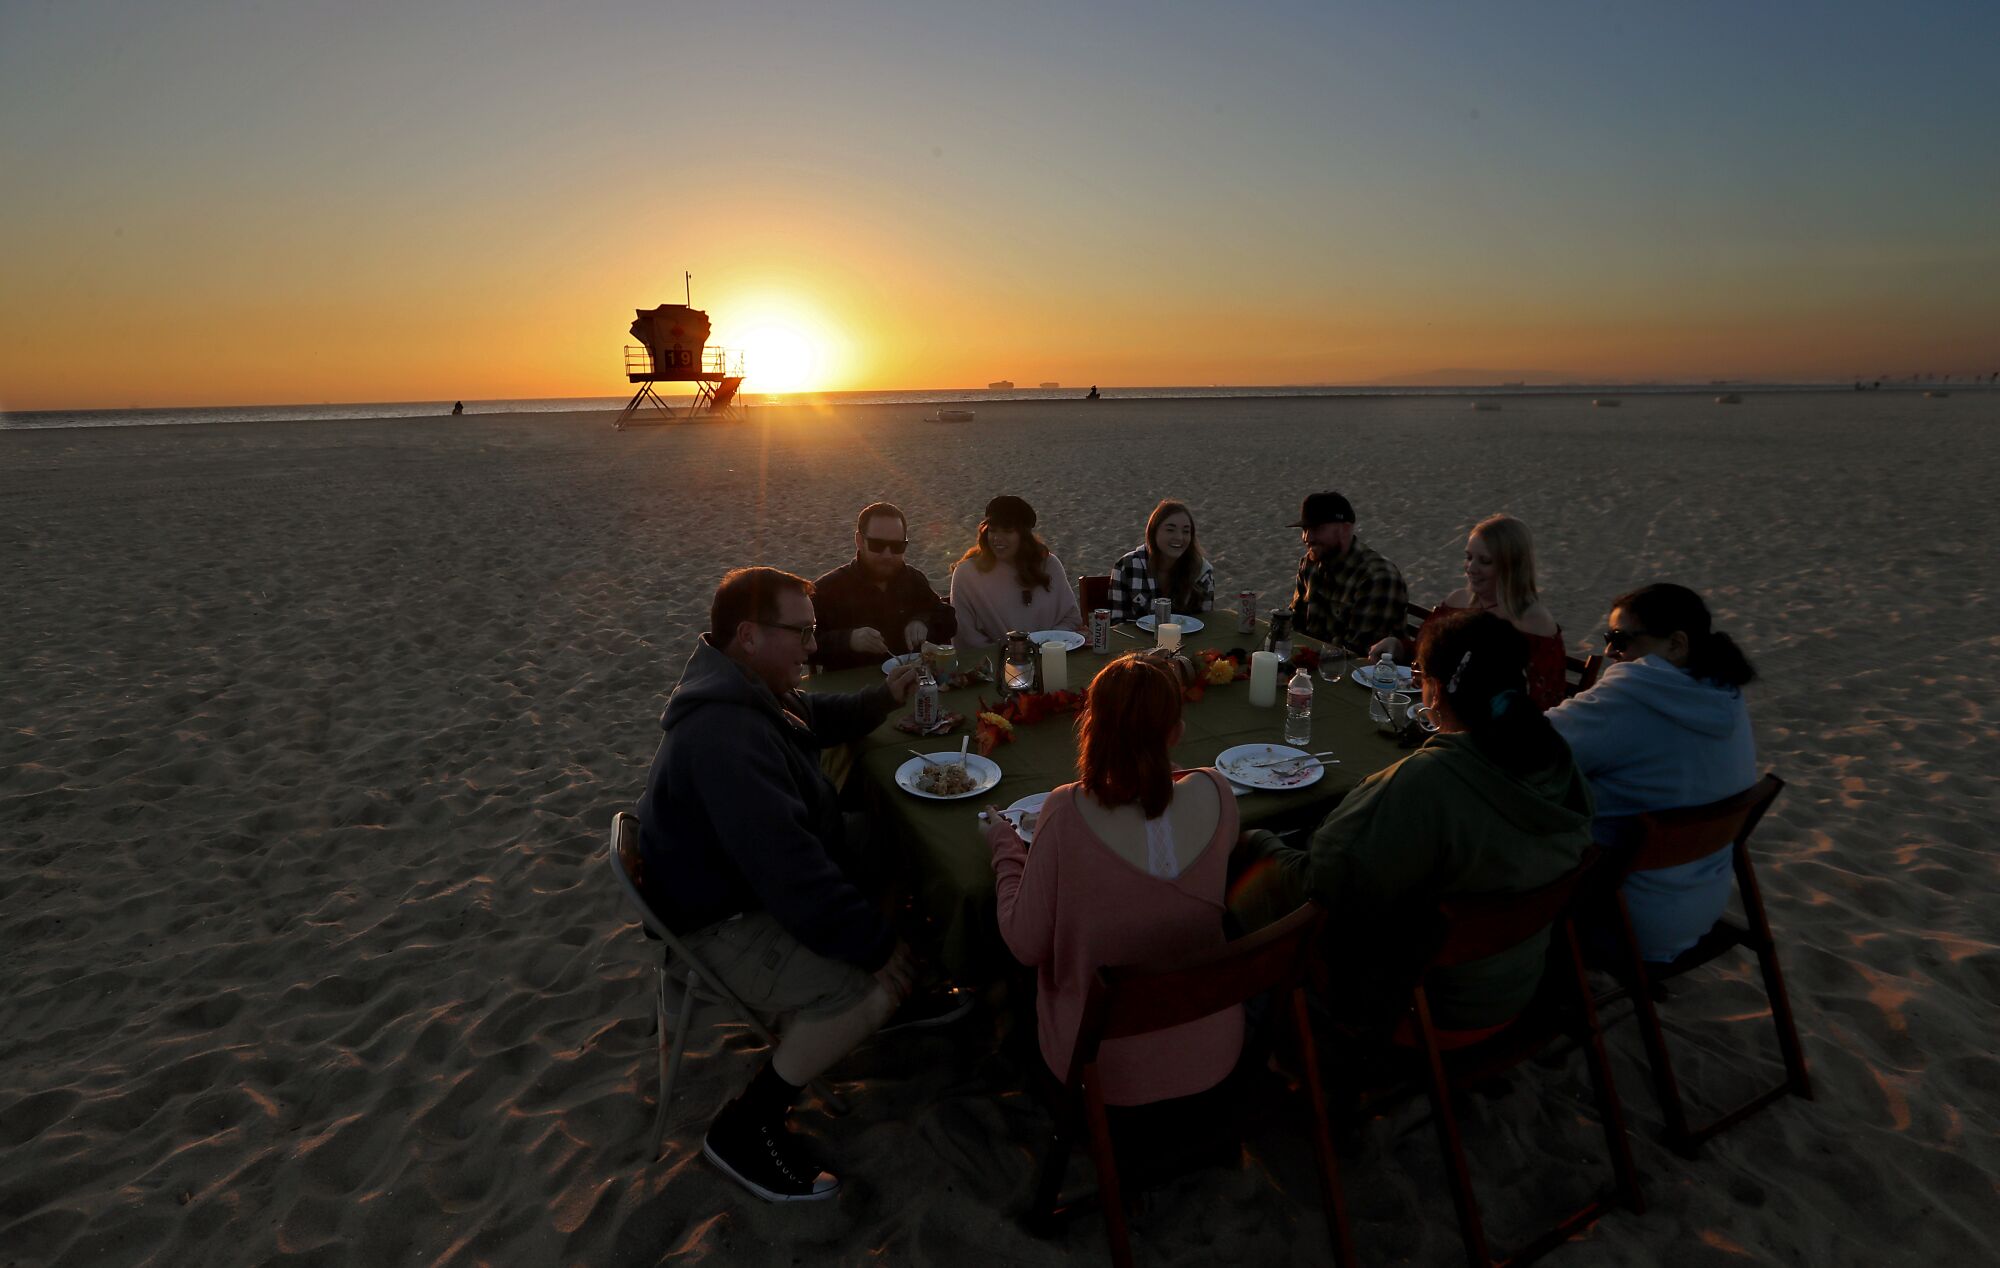 Nine people sit for dinner at a round table on the beach at sunset.